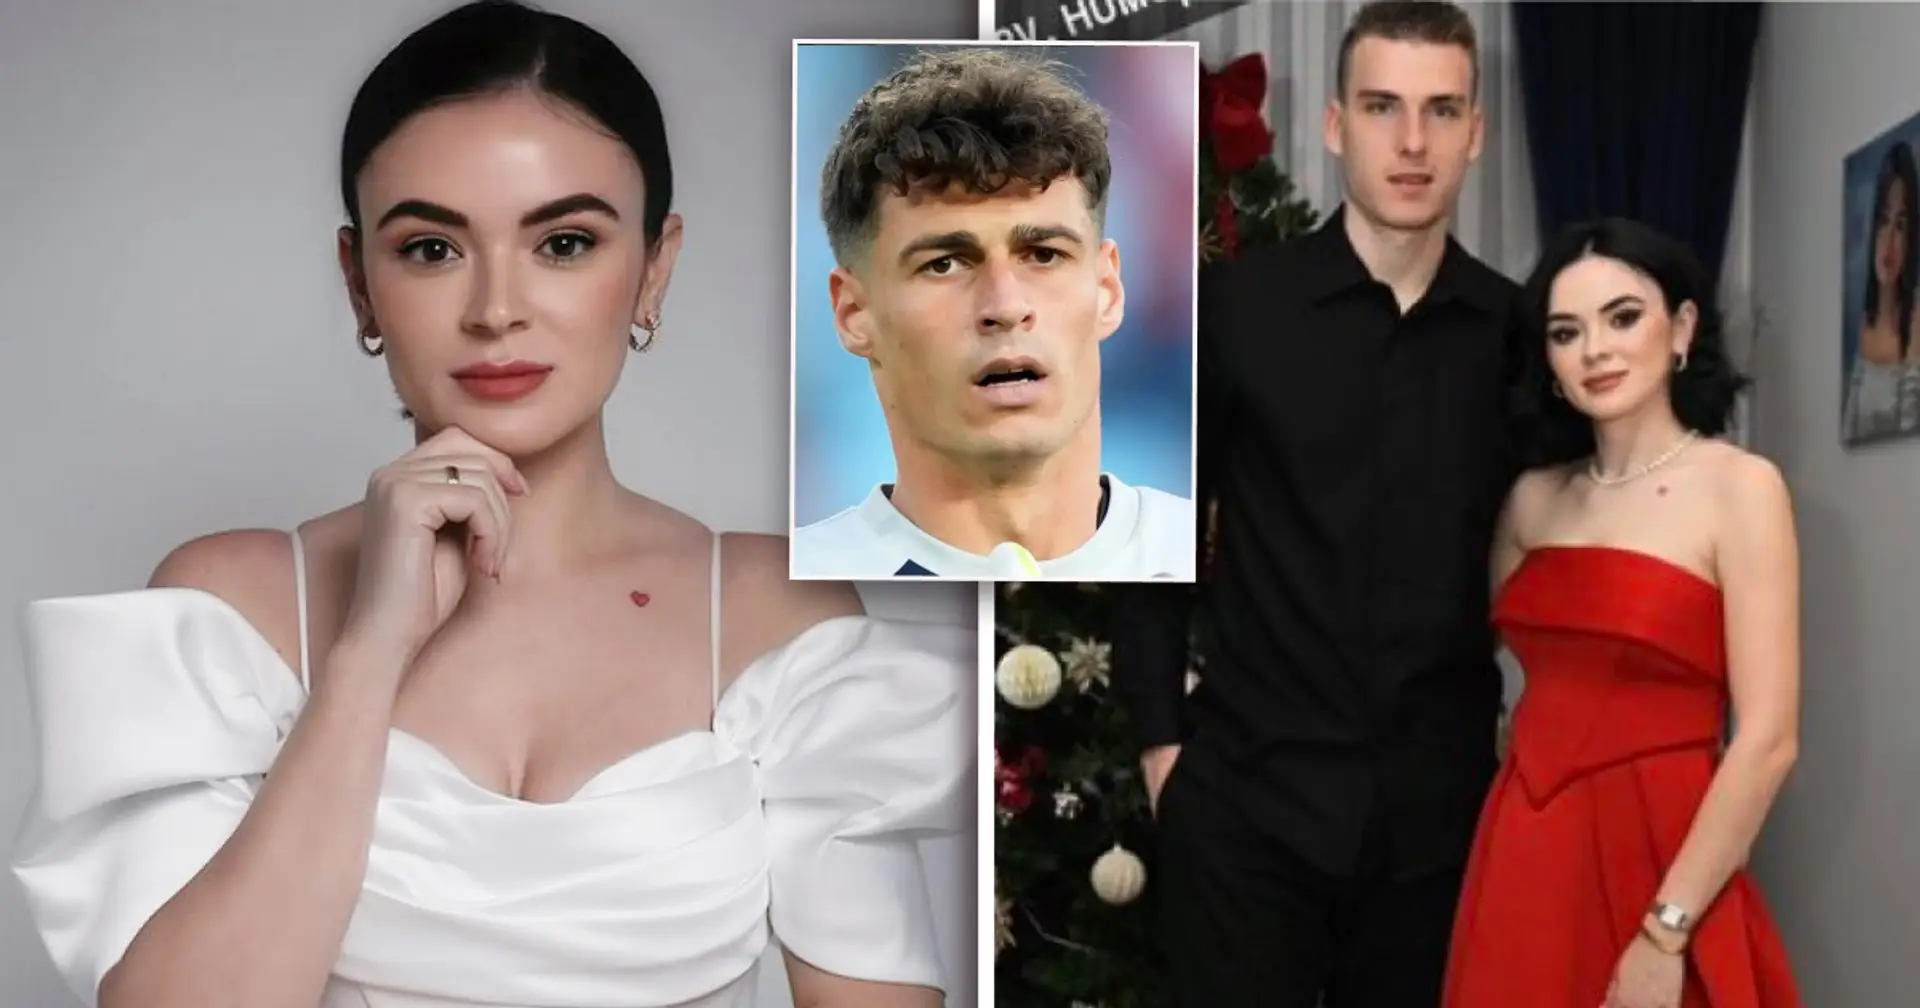 Lunin's wife makes bold claim on Instagram – Kepa wouldn't like it